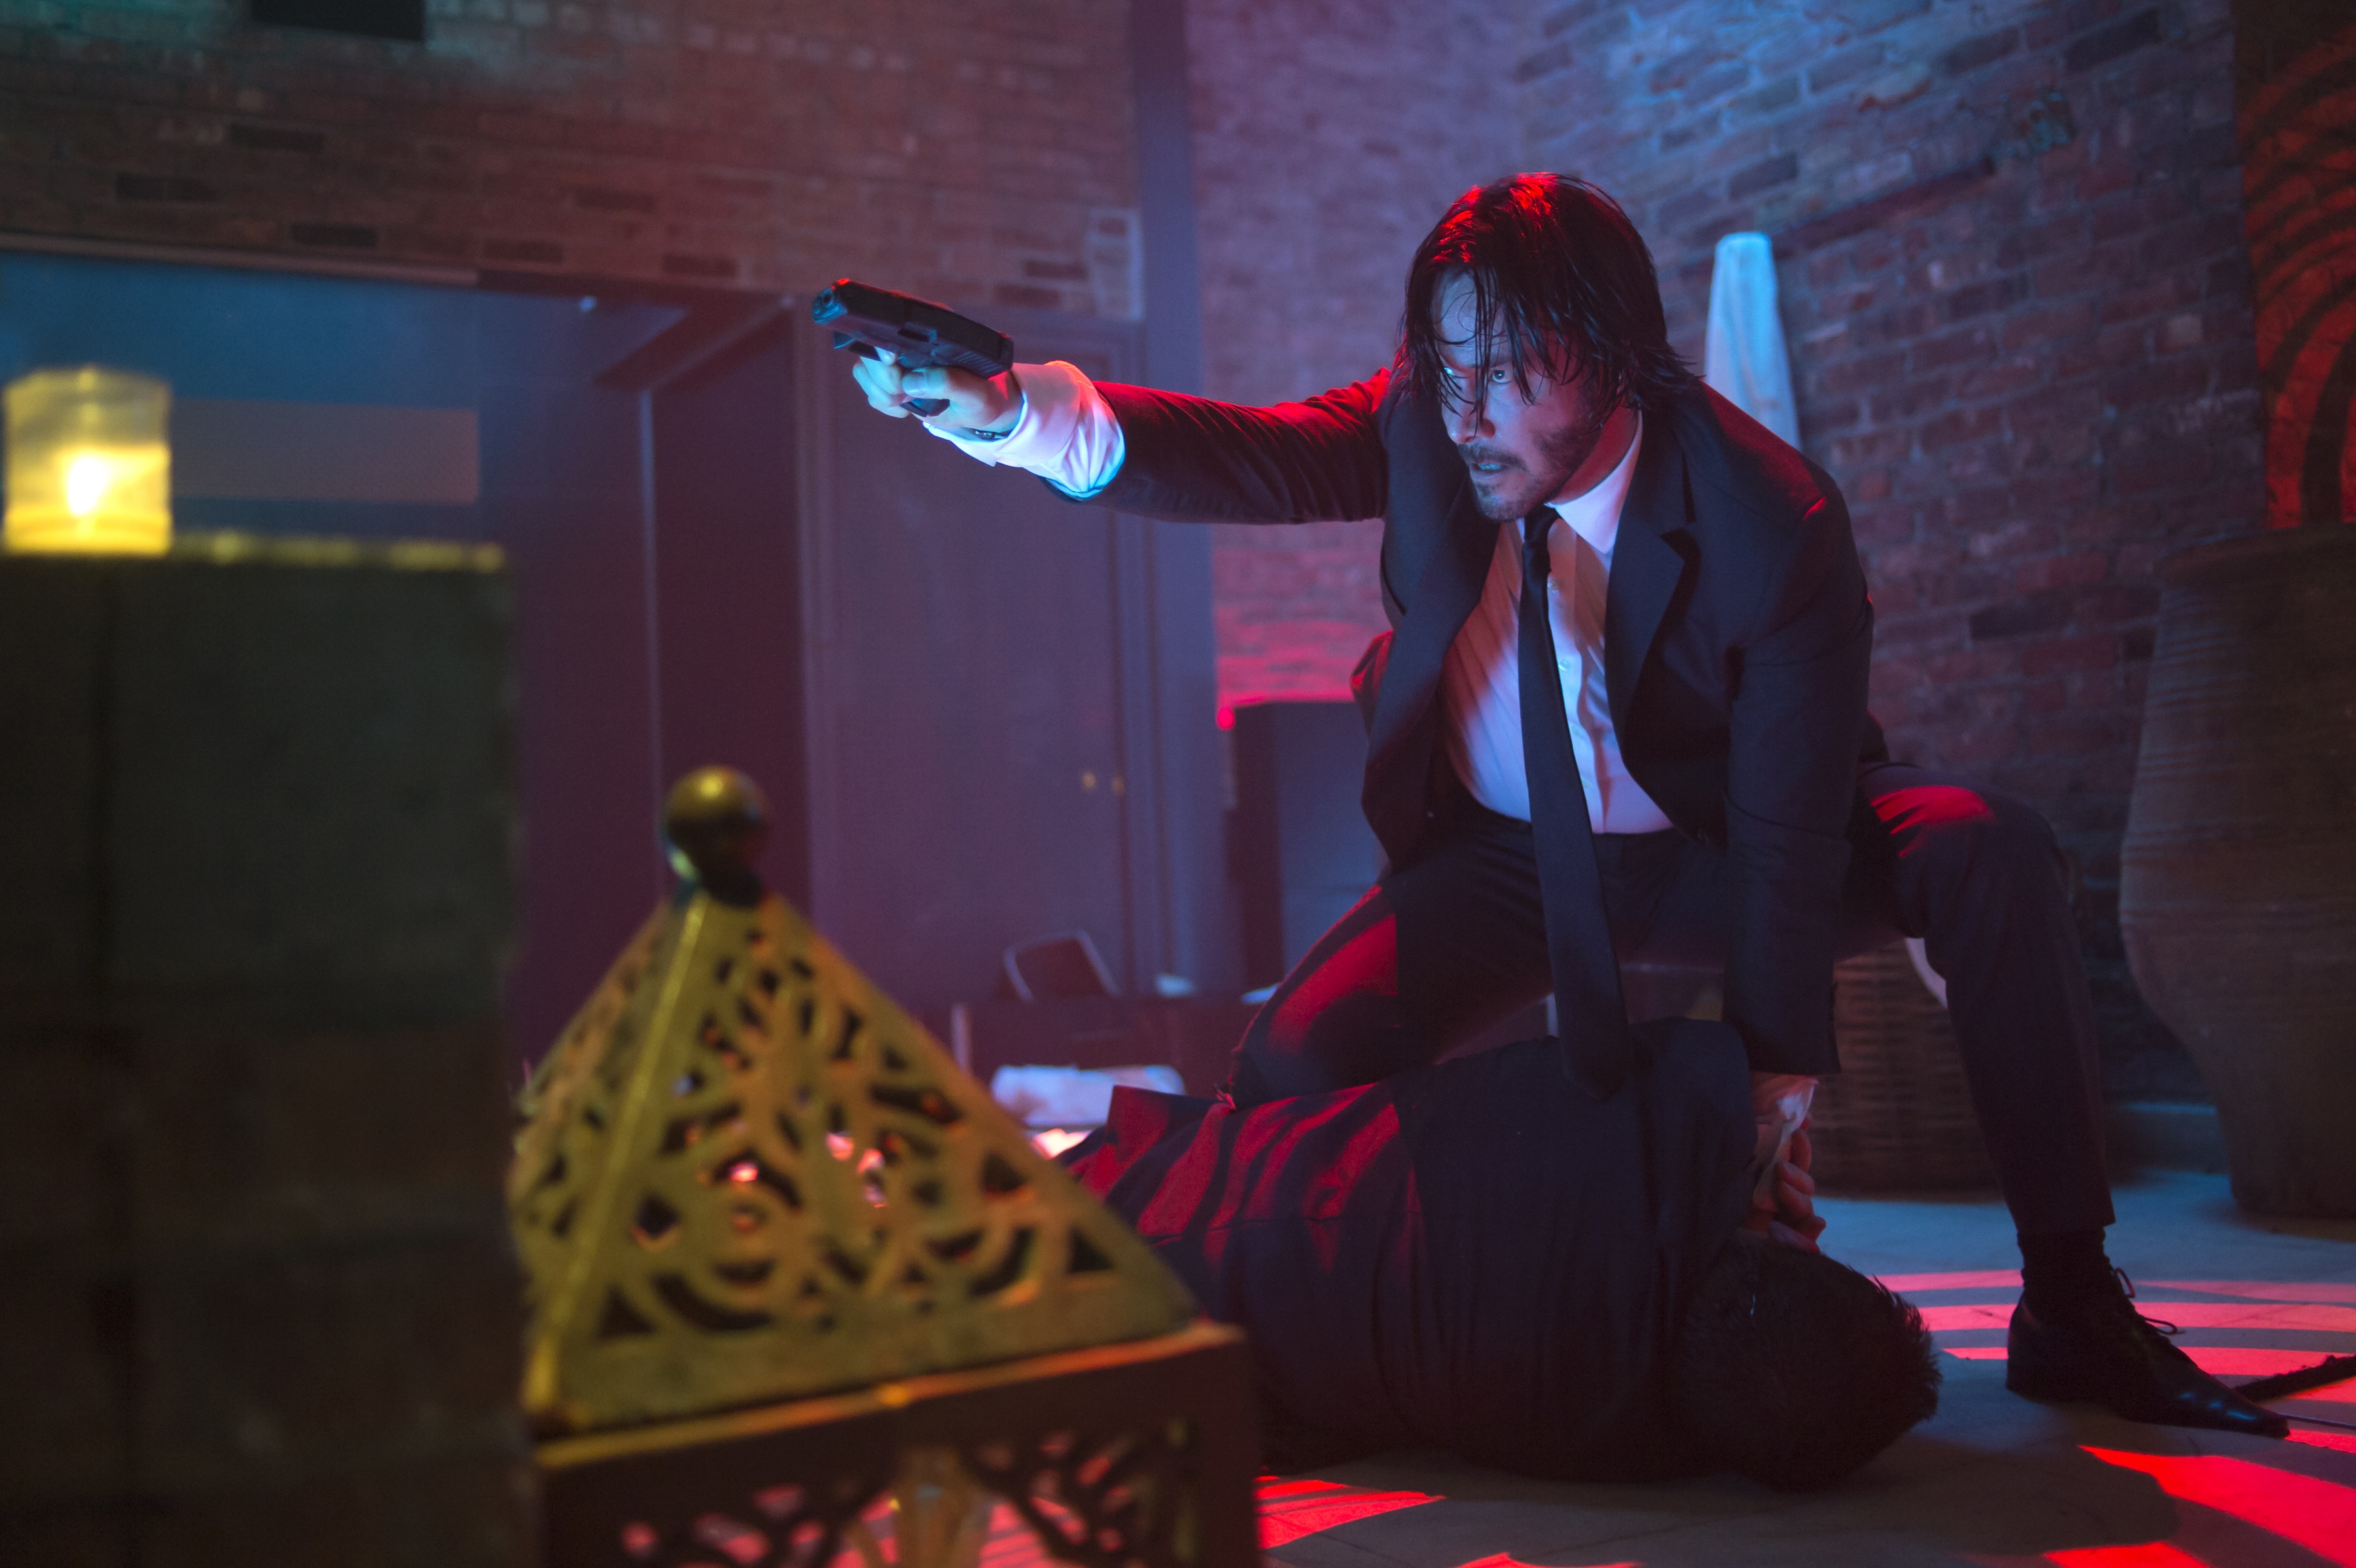 JOHN WICK Offers A Fun, Pulpy Rush of Action